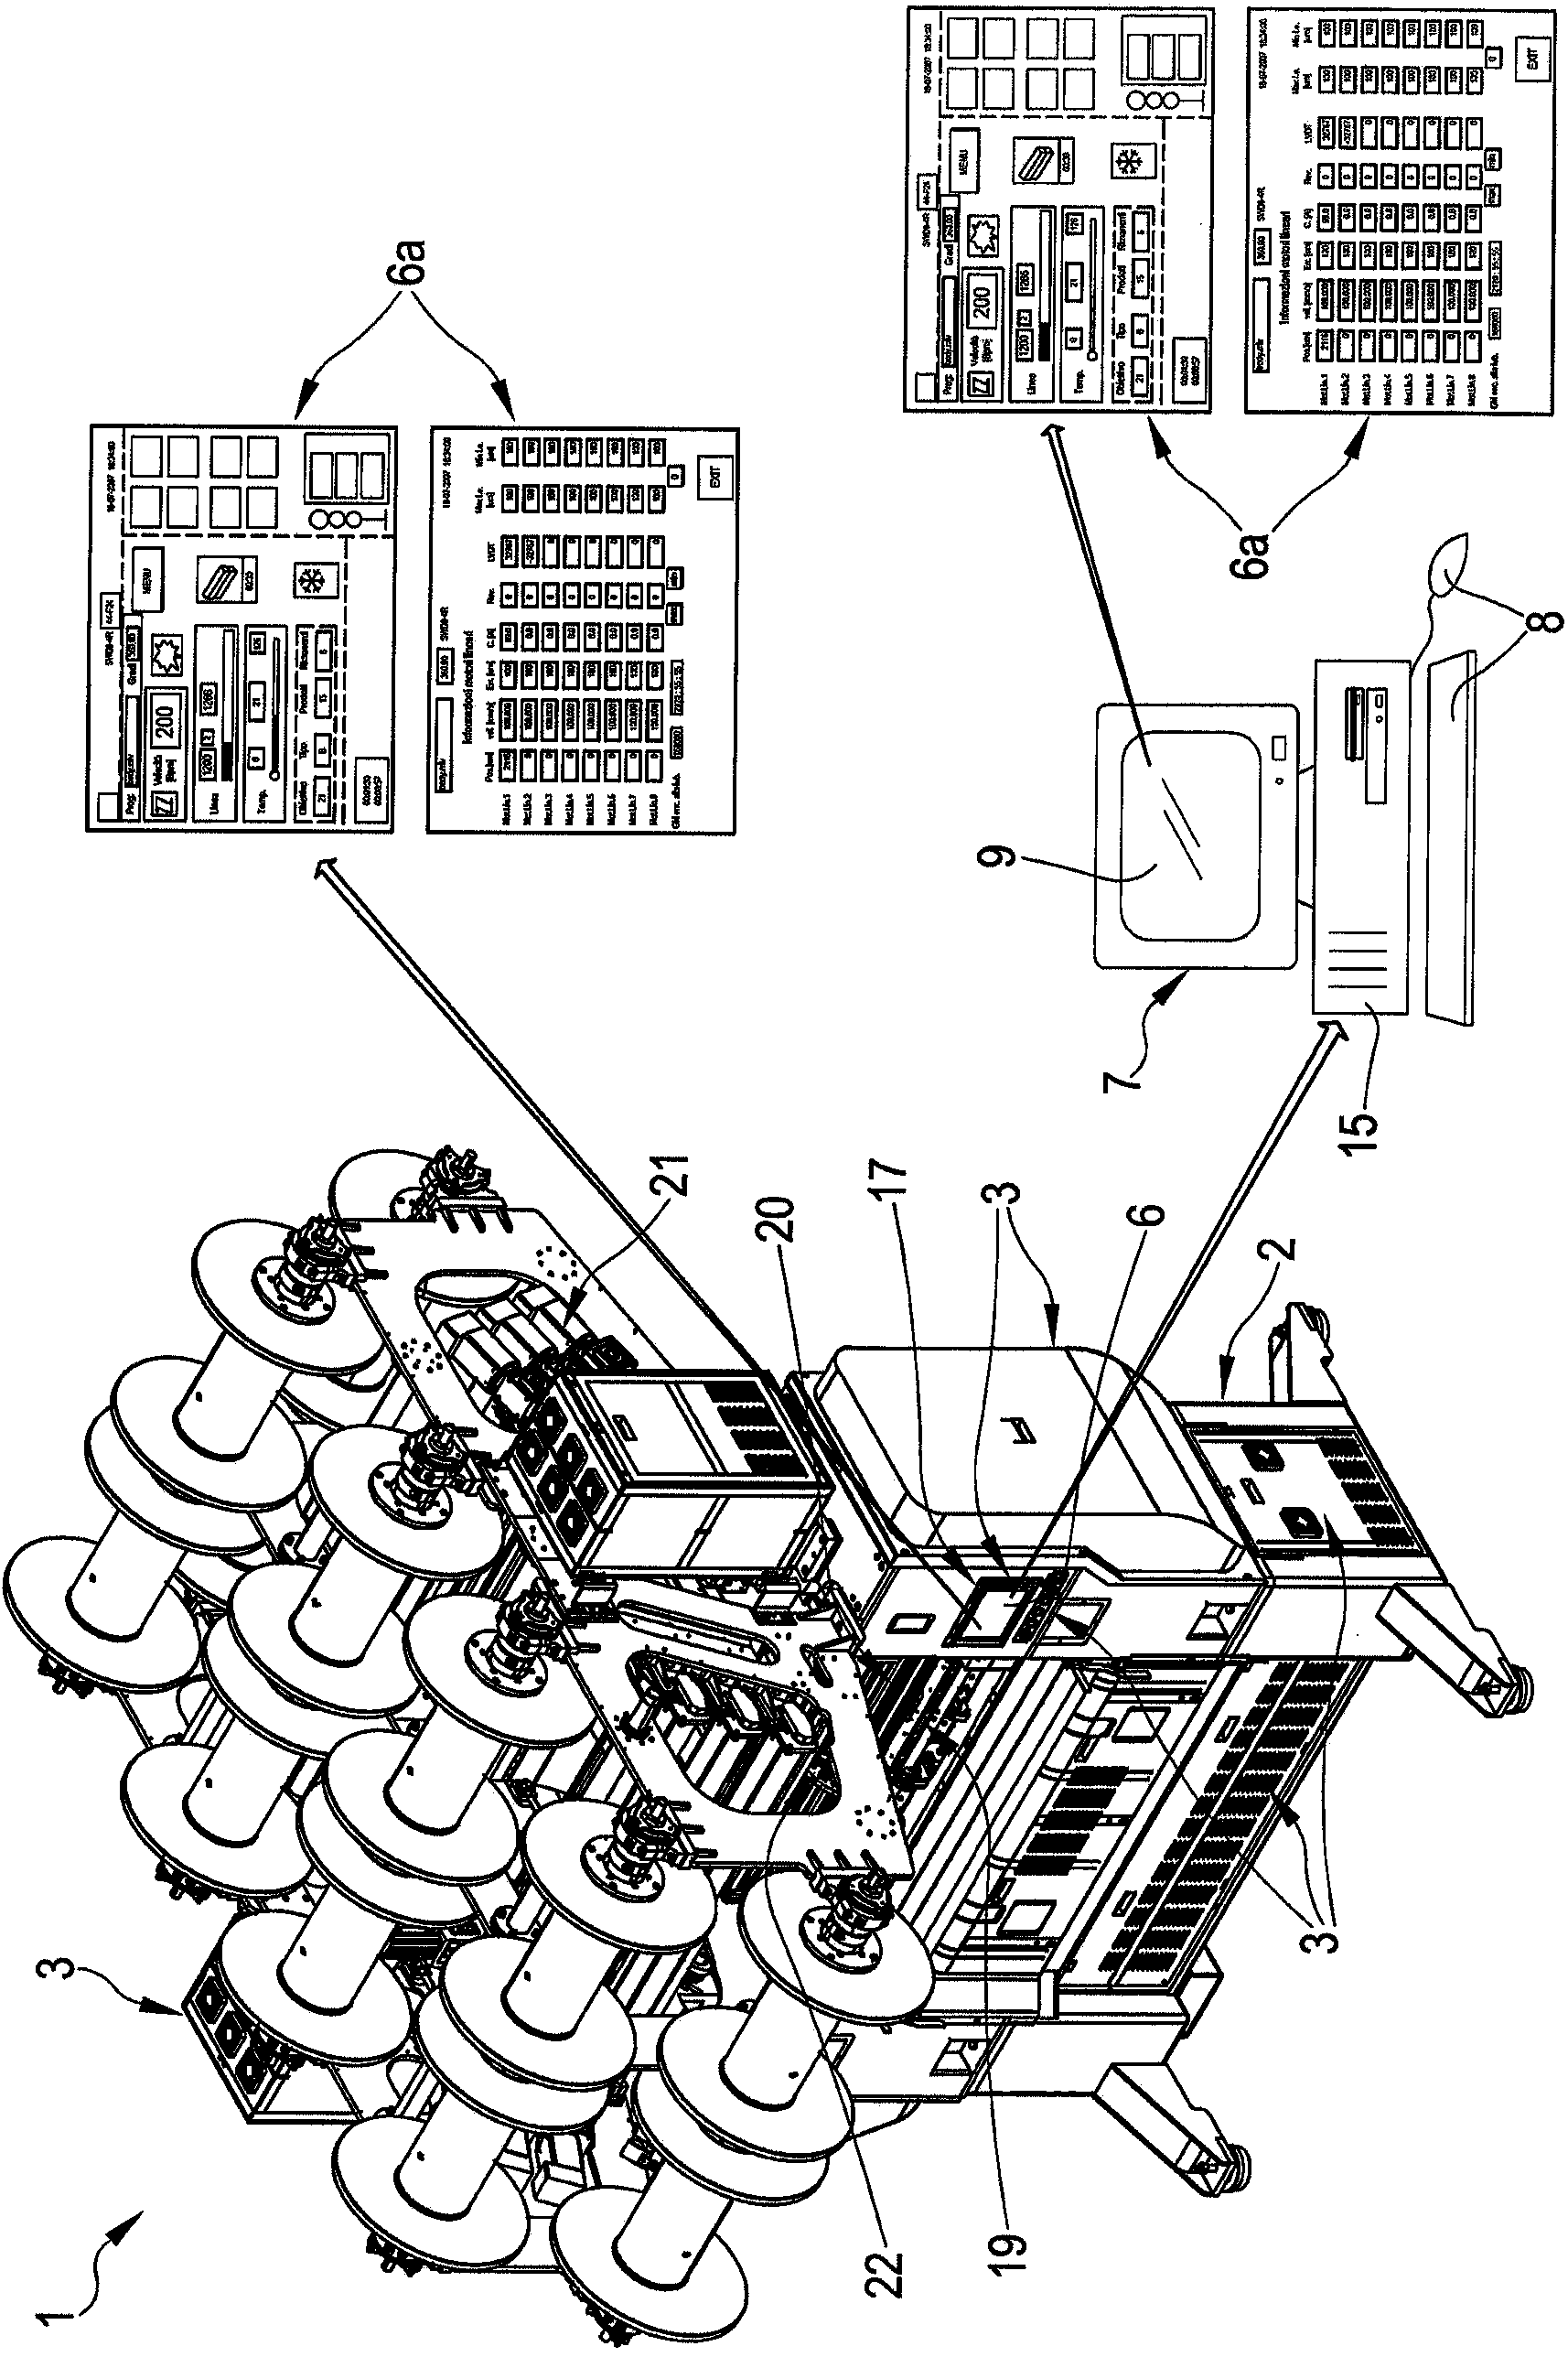 A warp knitting machine and a method for access to and control of the machine